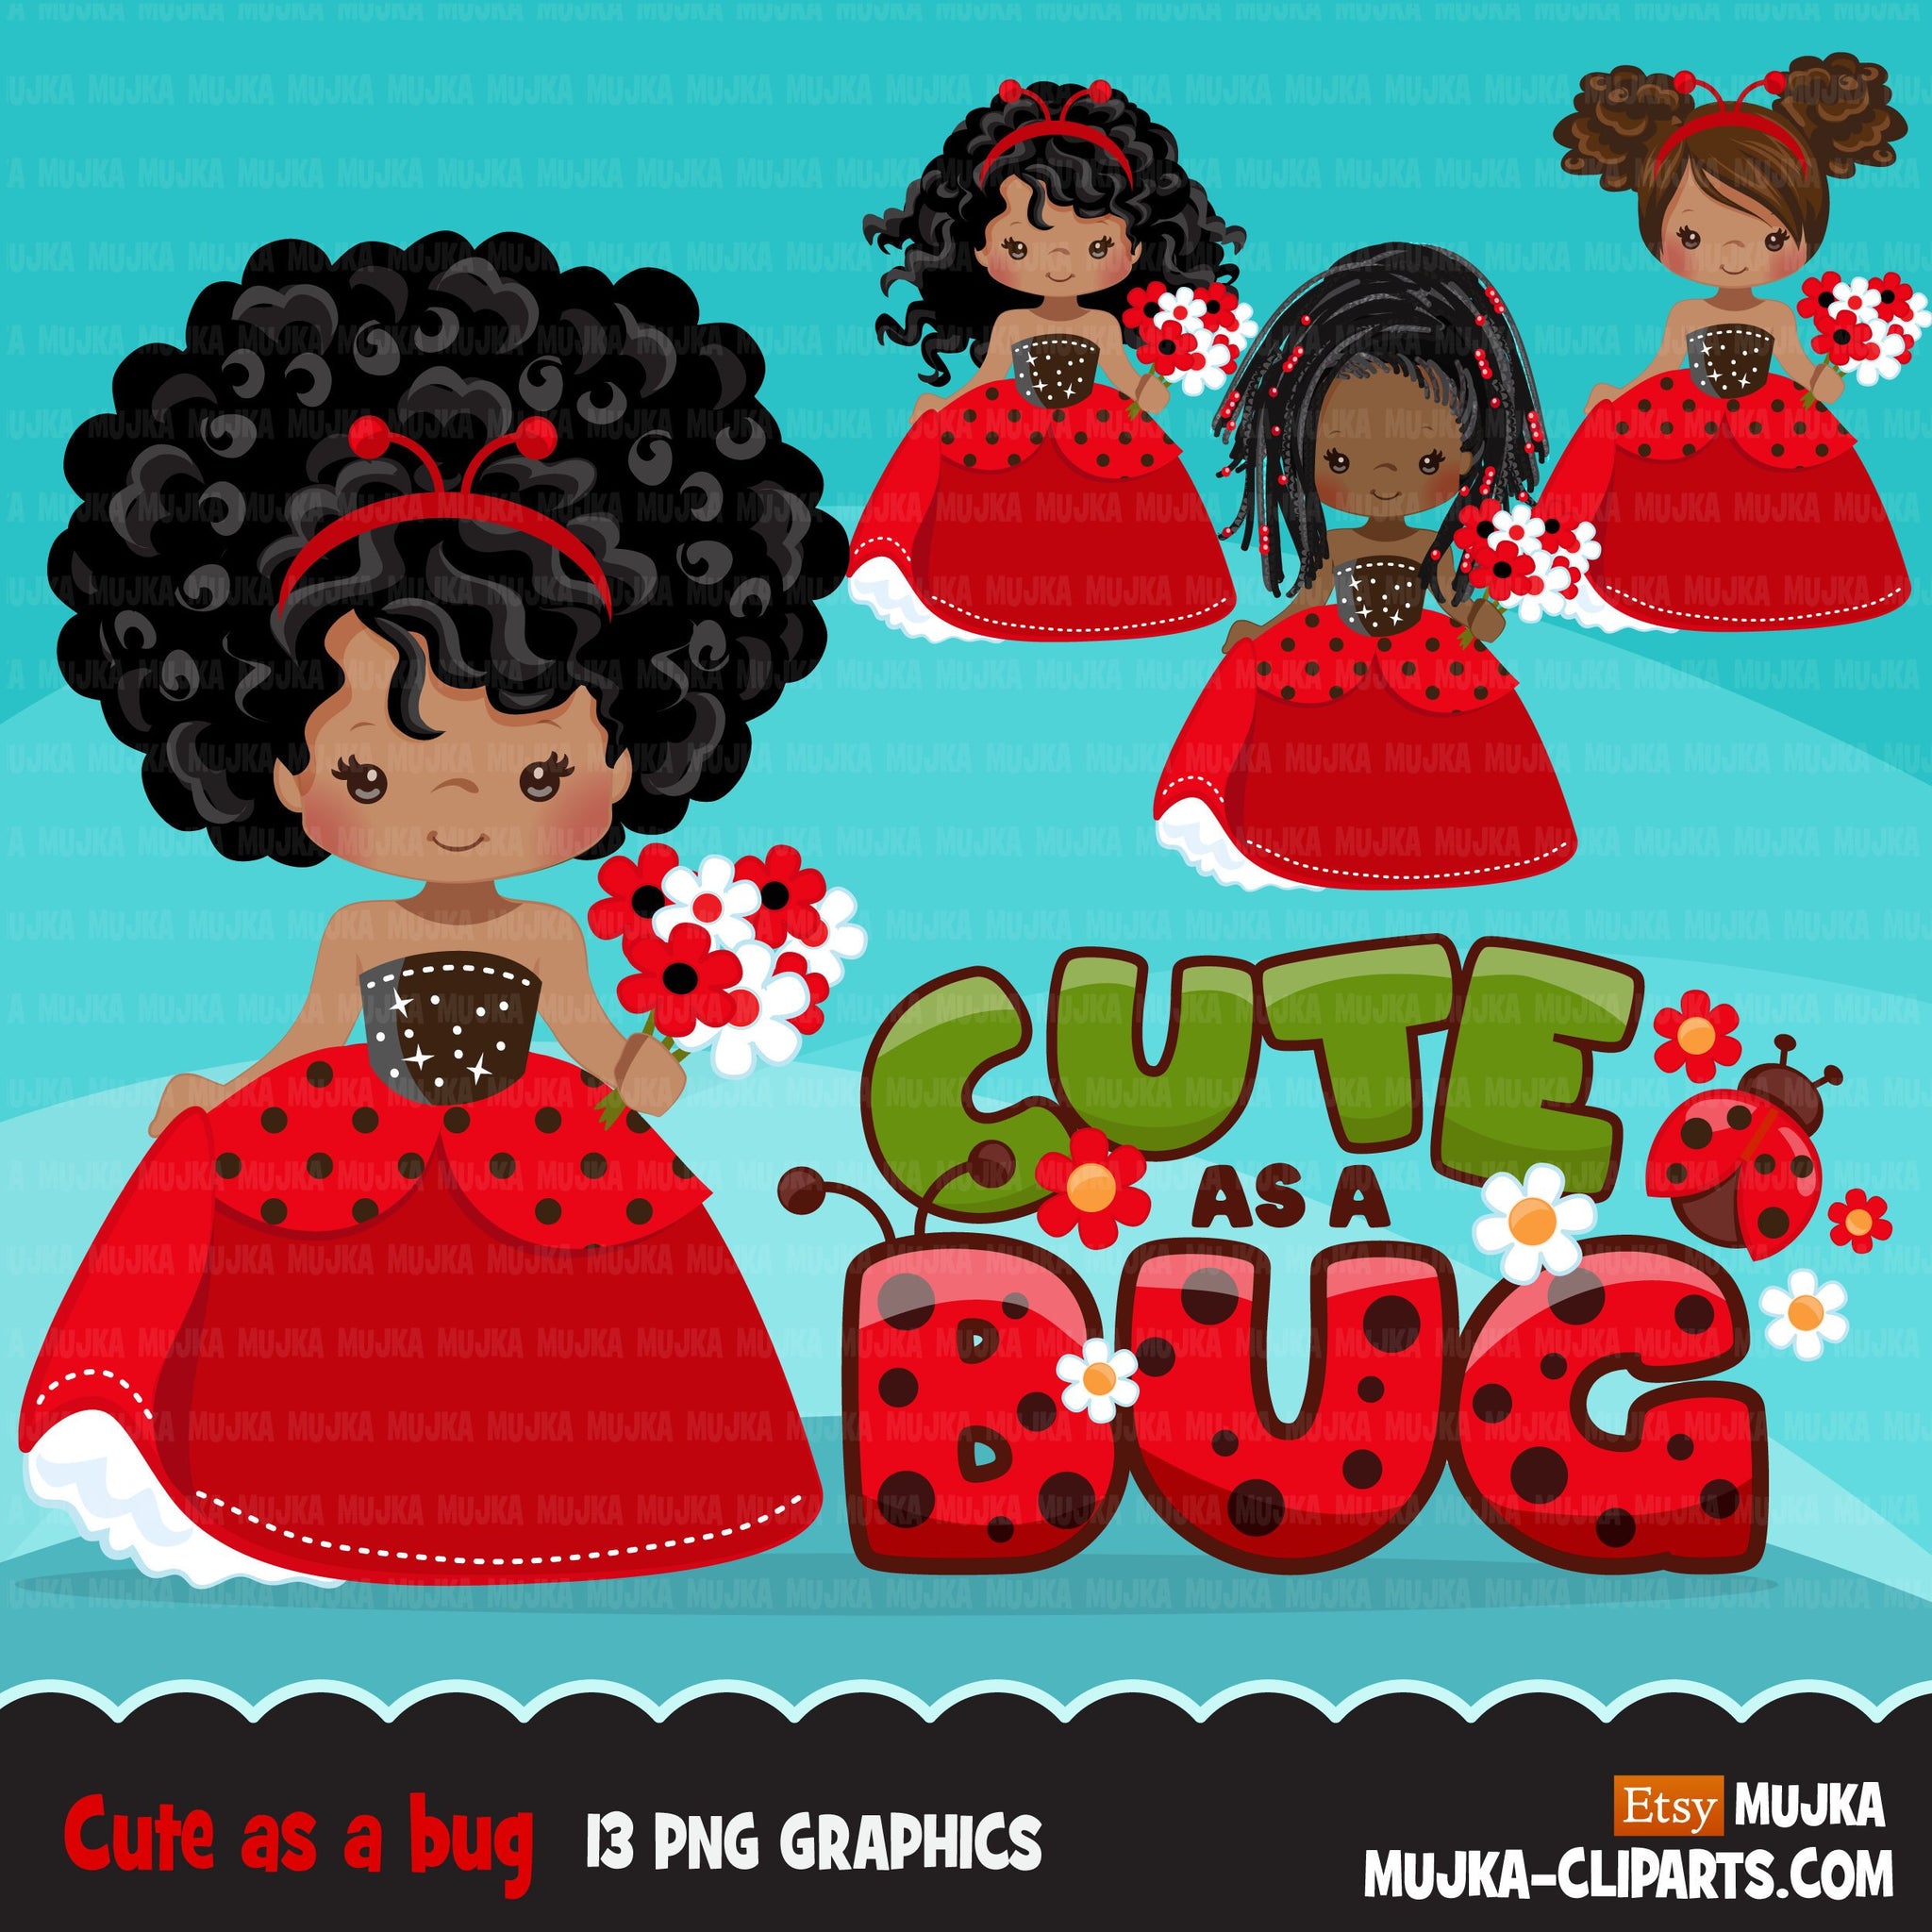 Ladybug Clipart, Black Princess, fairy tale graphics, girls with flowers, easter, spring, cute as a bug, commercial use clip art